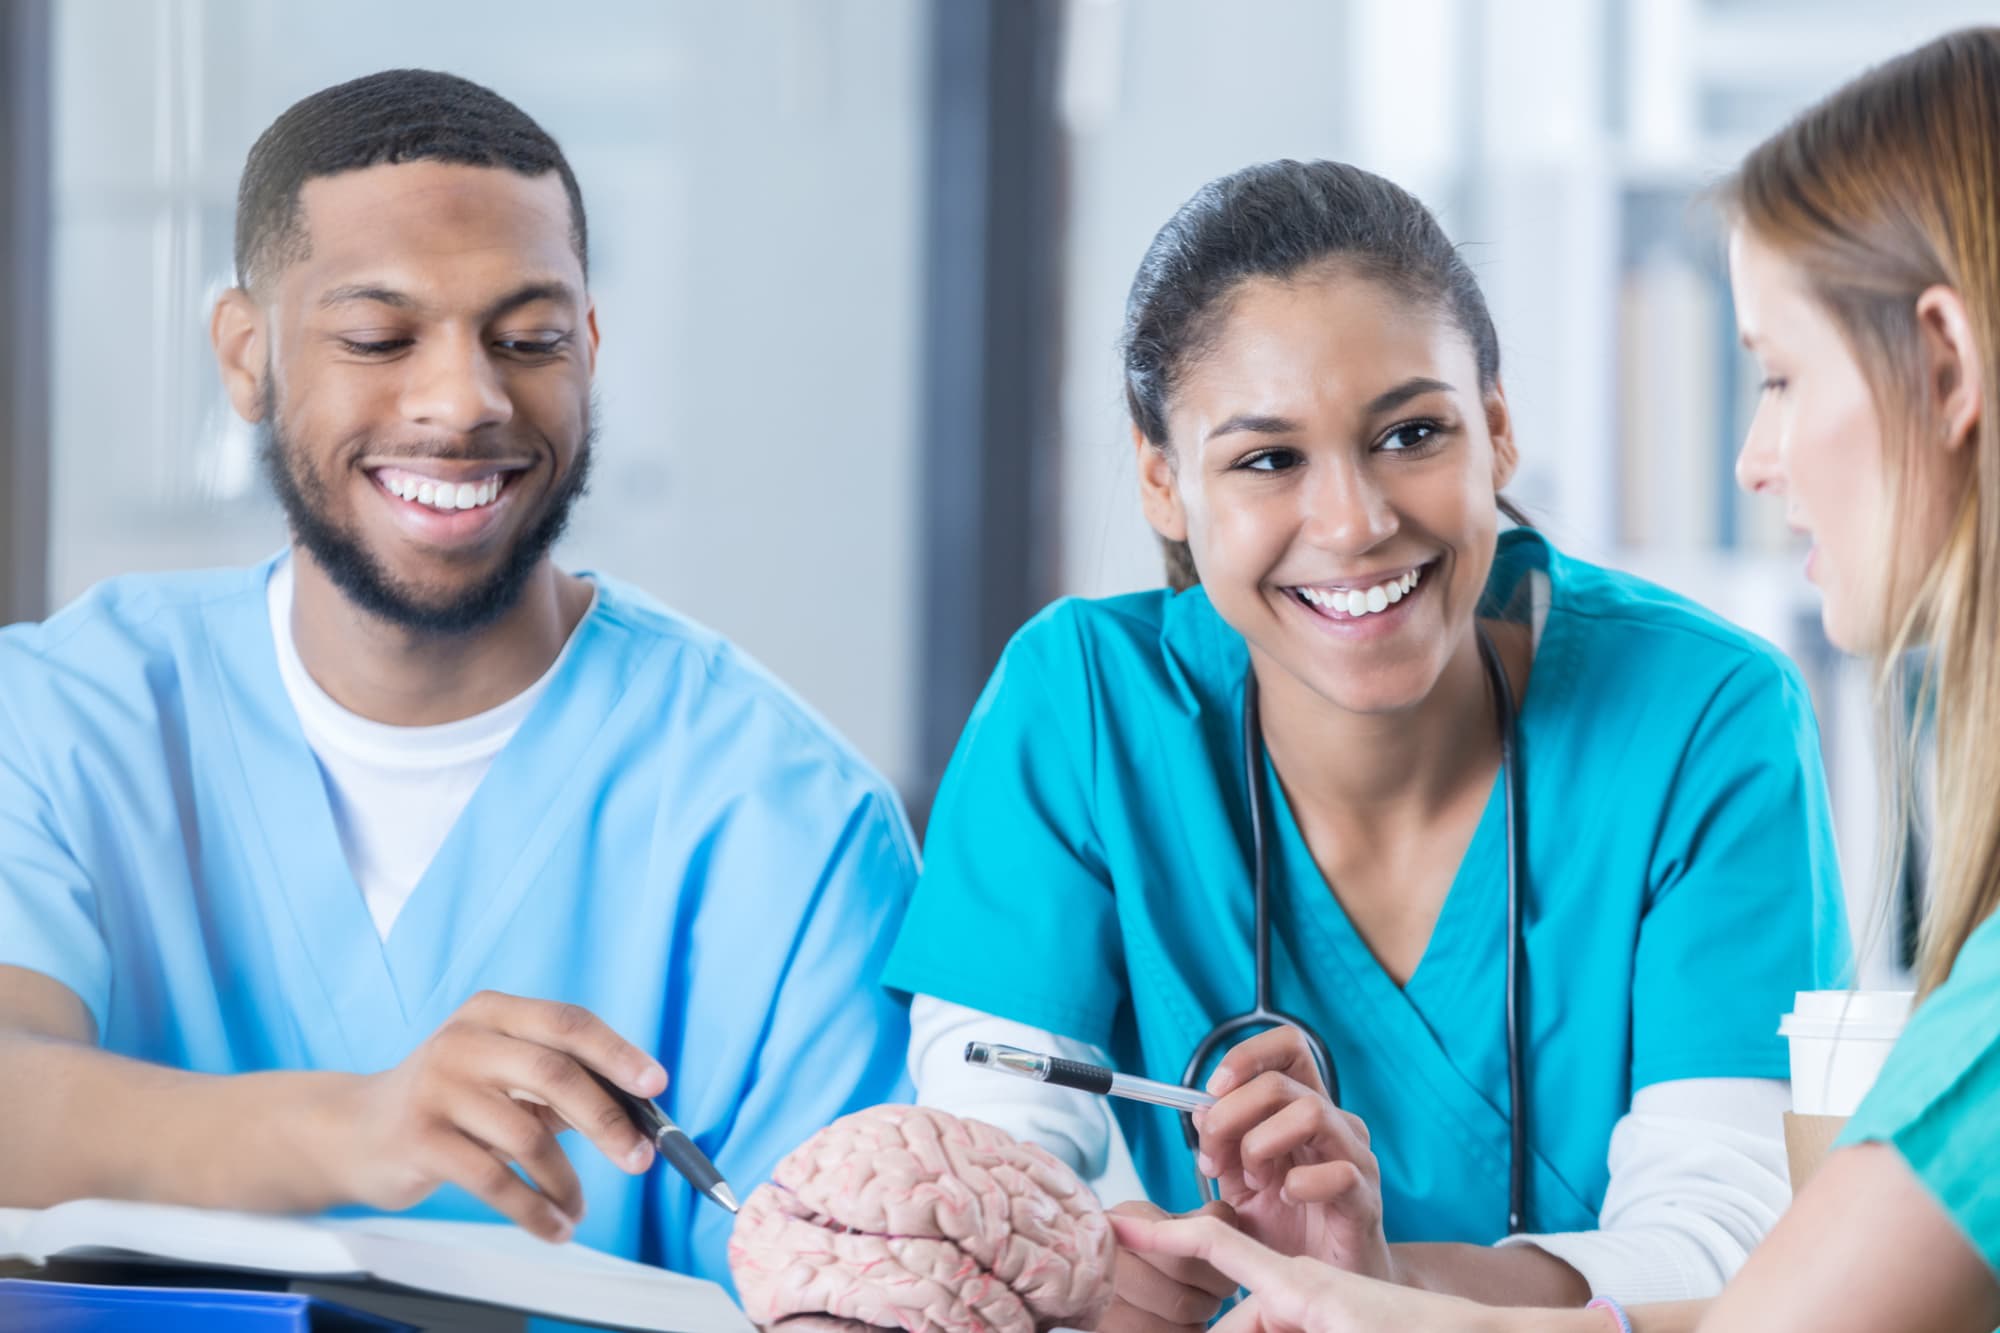 What Are the Prerequisites for Nursing School?